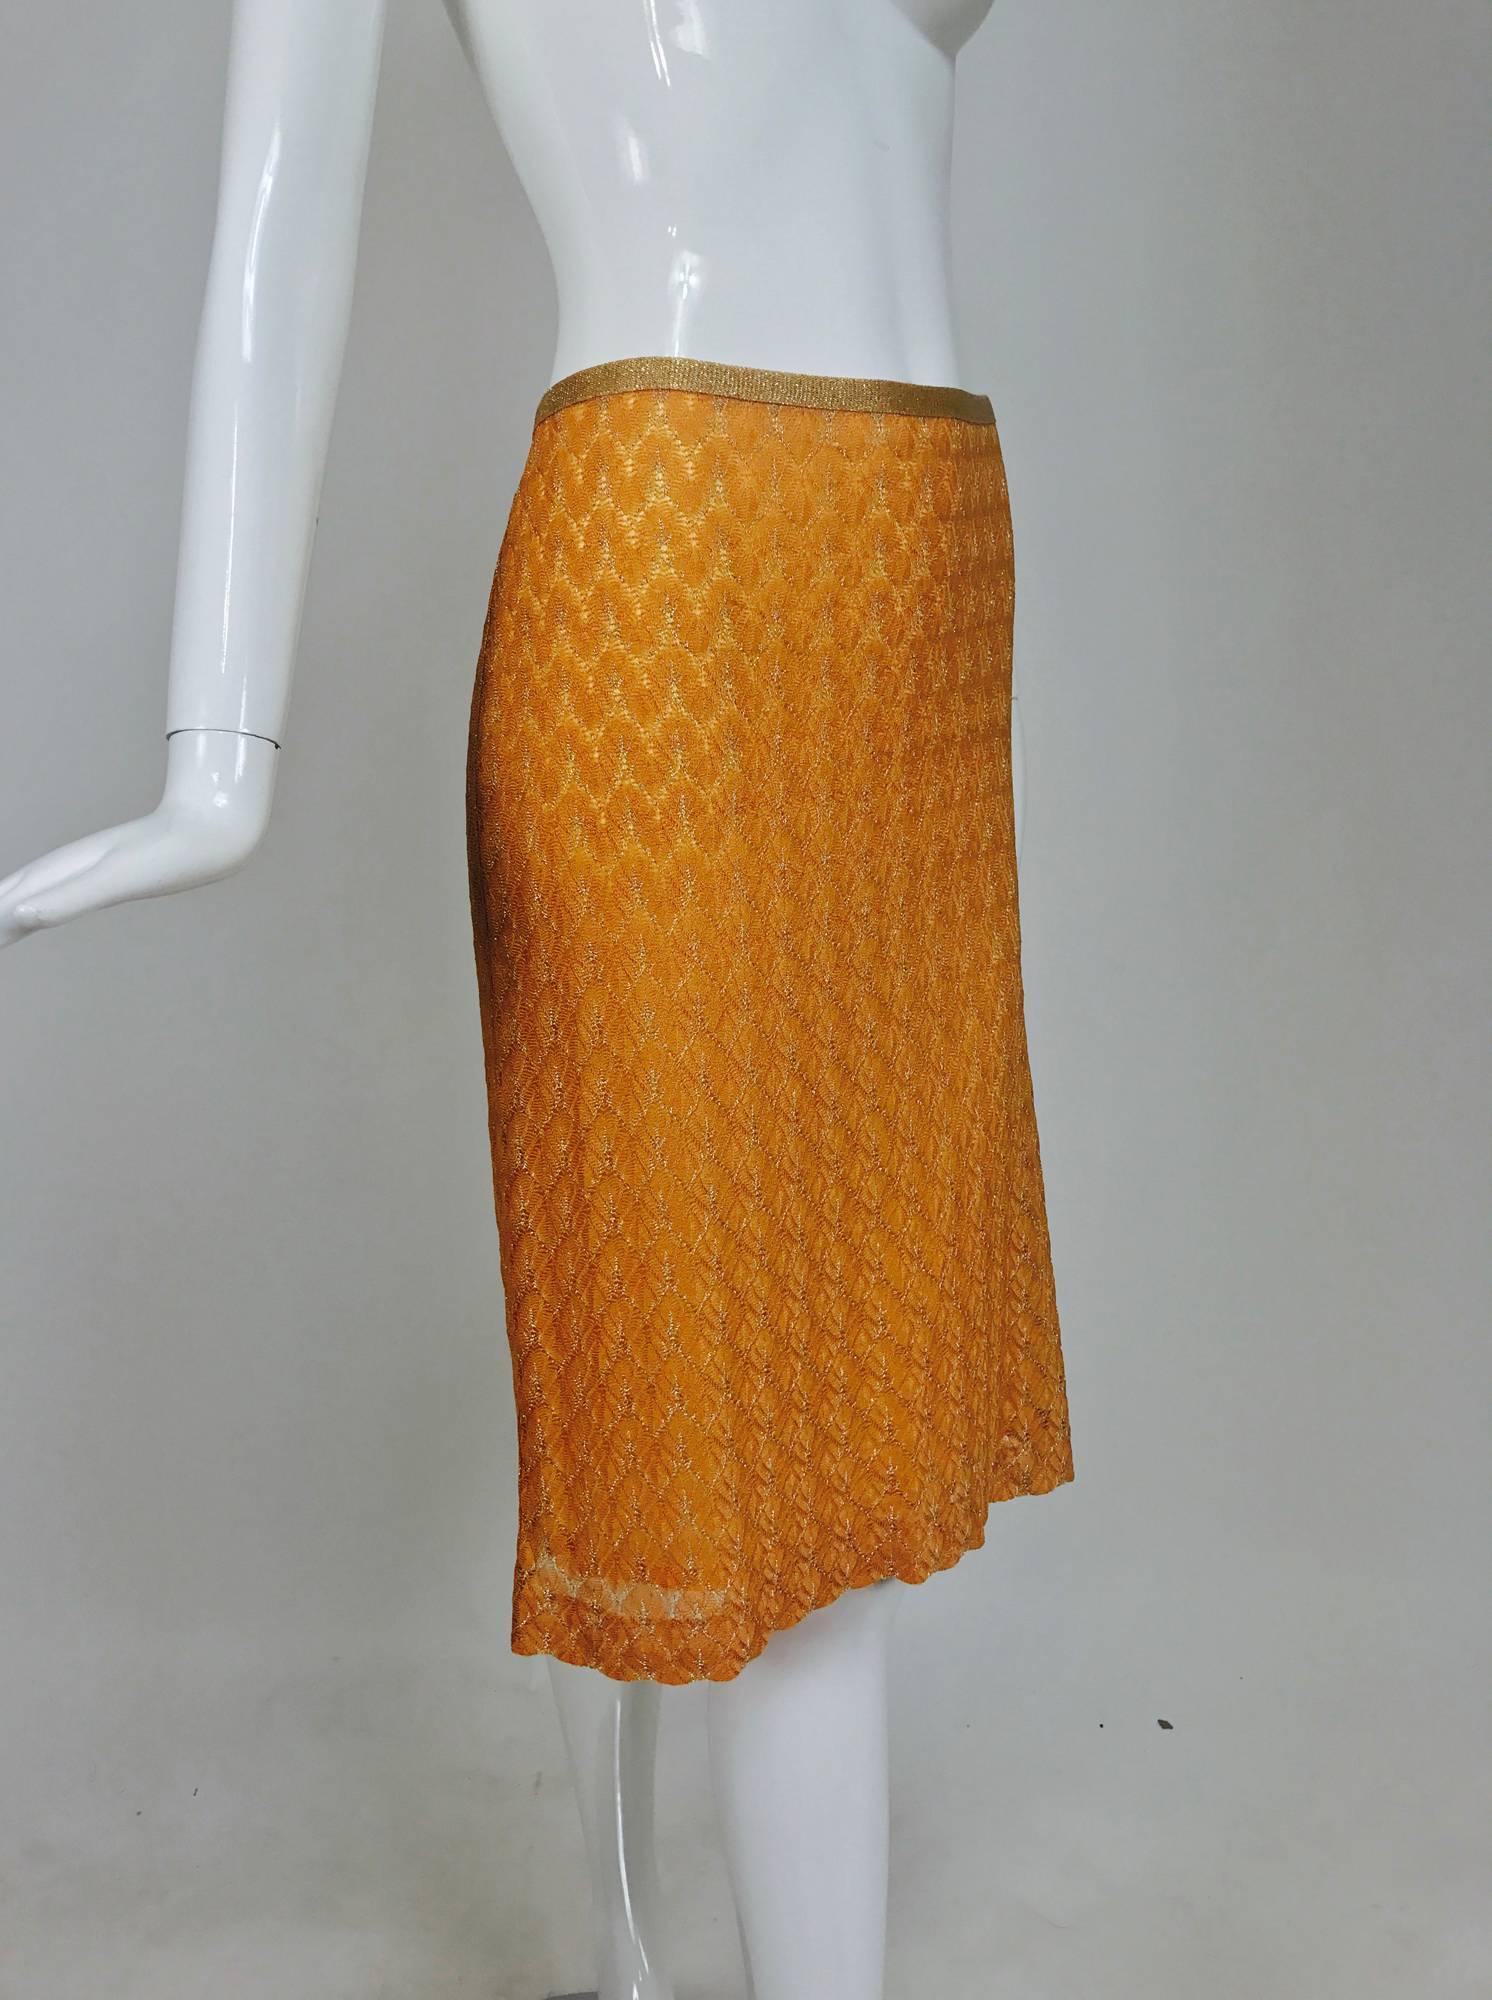 Missoni coral and gold metallic knit straight skirt...Gold metallic knit waist band...Fully lined...Center back kick pleat...Closes with a zipper and hook and eye at the back...Unworn new without tags...Marked size 44, measurements below.

In